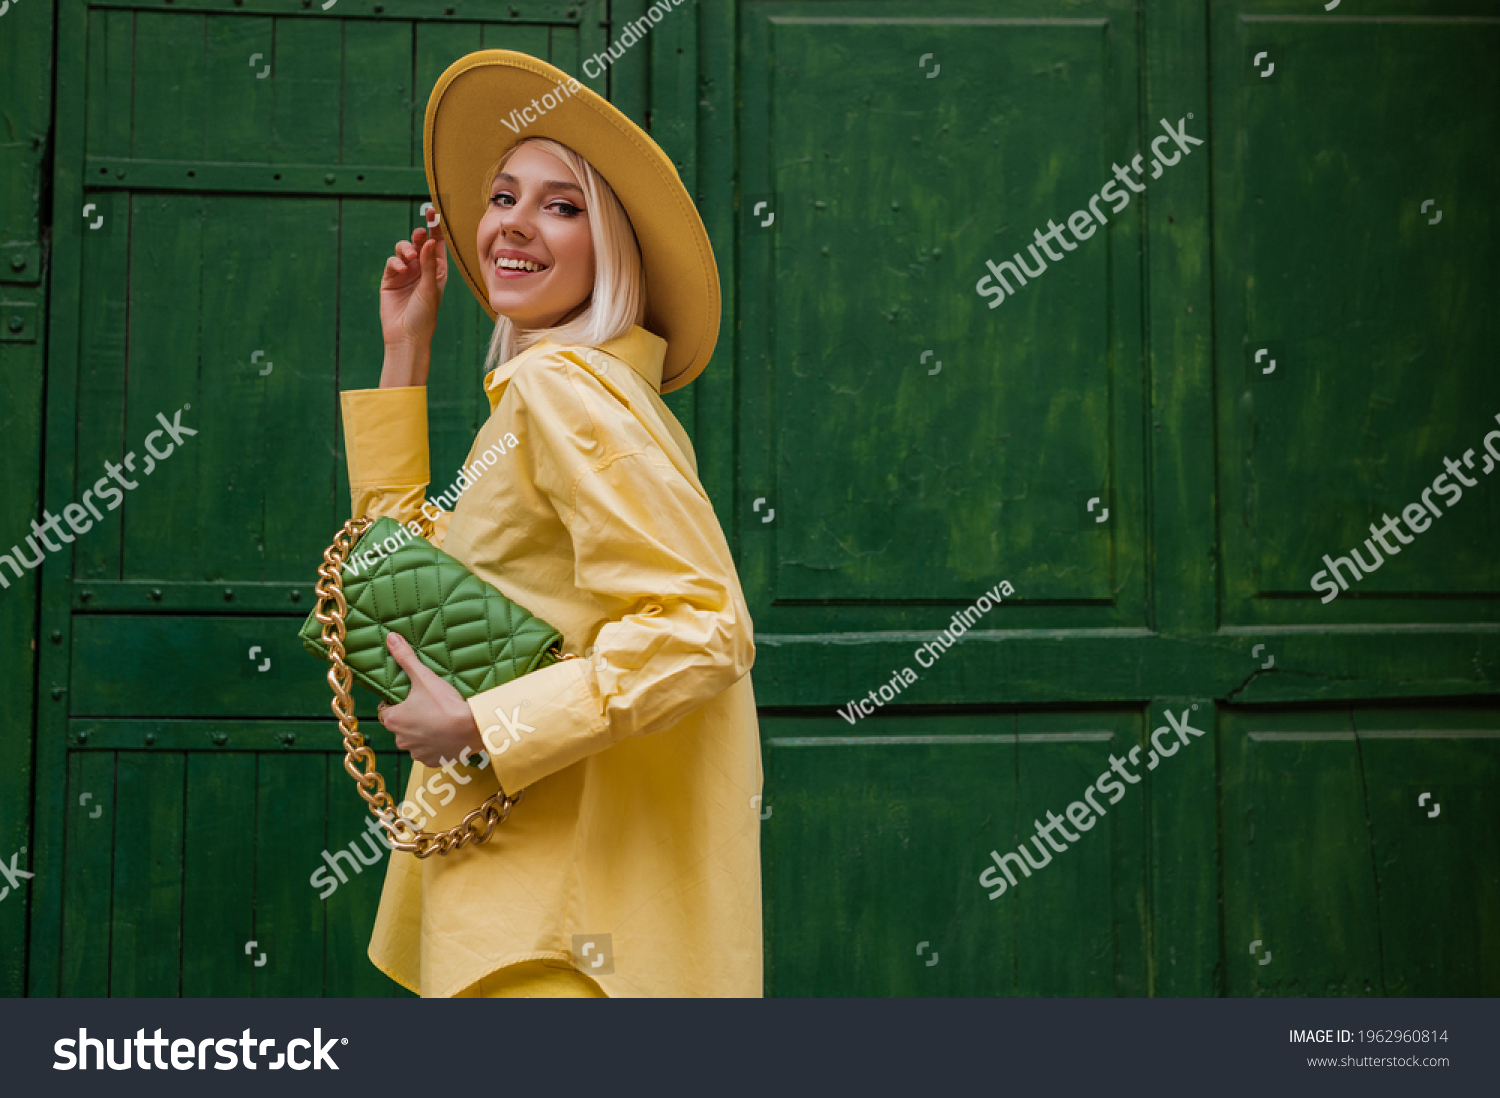 Joyful smiling woman wearing yellow hat, classic shirt, holding quilted faux leather green bag with chain, posing on green background in street. Copy, empty space for text #1962960814